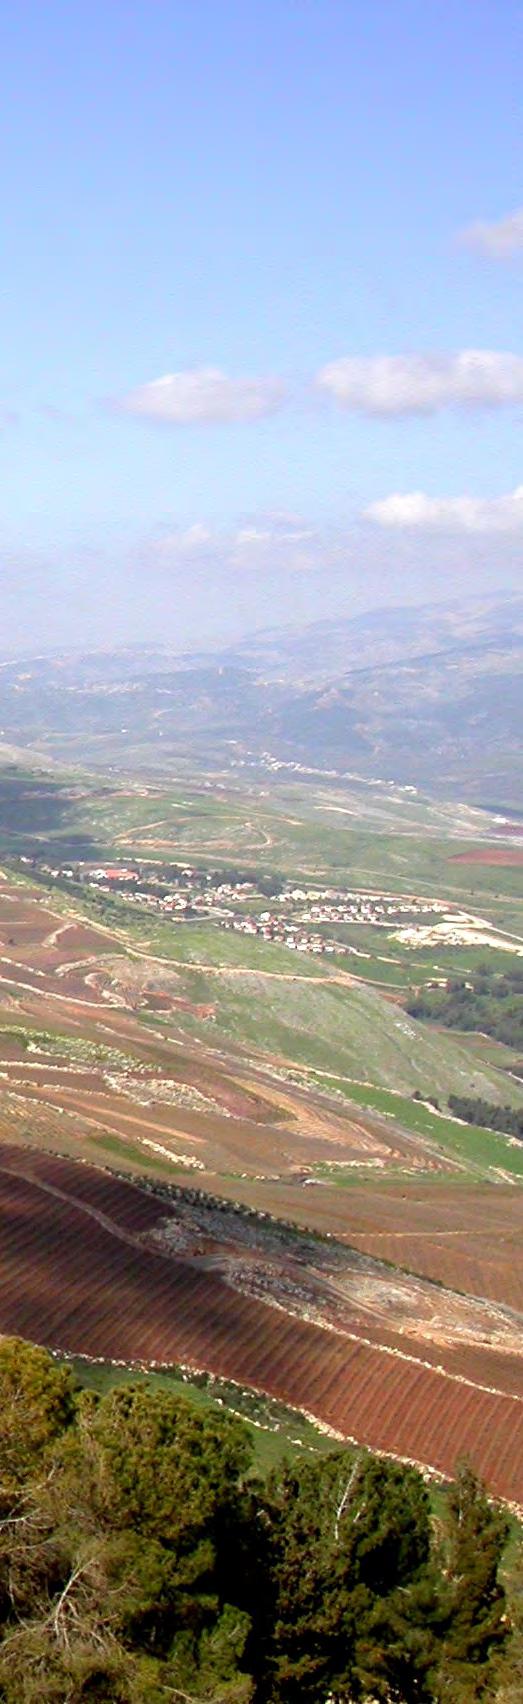 Upper Galilee Region Golan Heights Day 4/ Fri 20th April Safed - up into the hills of Galilee to